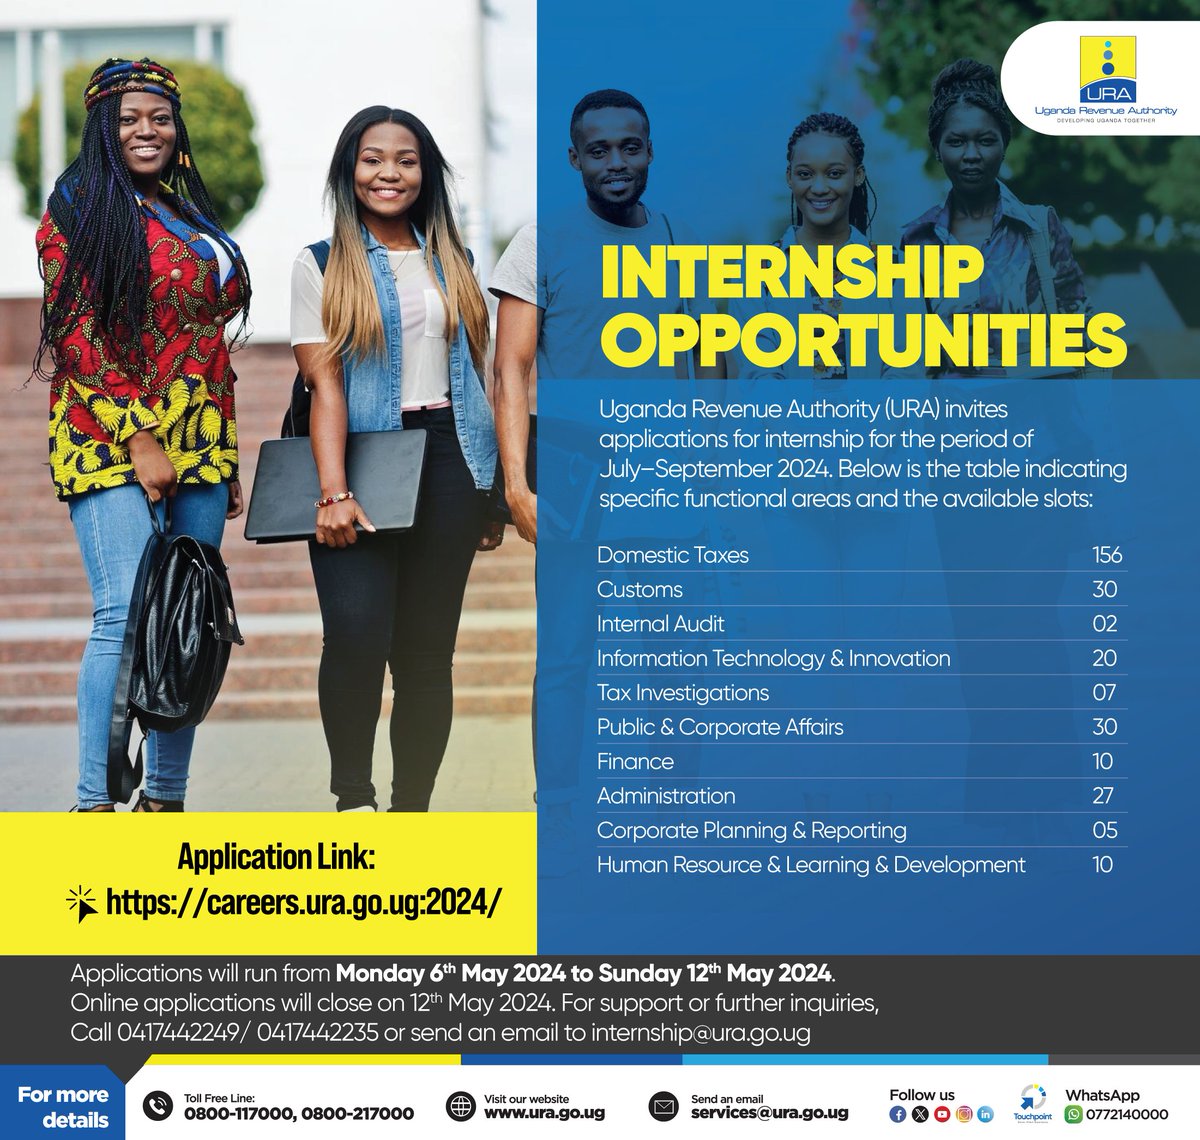 Undergraduates stand up! URA has over 287 internship slots up for grabs for the period of July-September, 2024. Applications are receivable starting Monday 6th May, 2024 to Sunday 12th May, 2024. The most prospective tax collector might be that young person in your circle.…